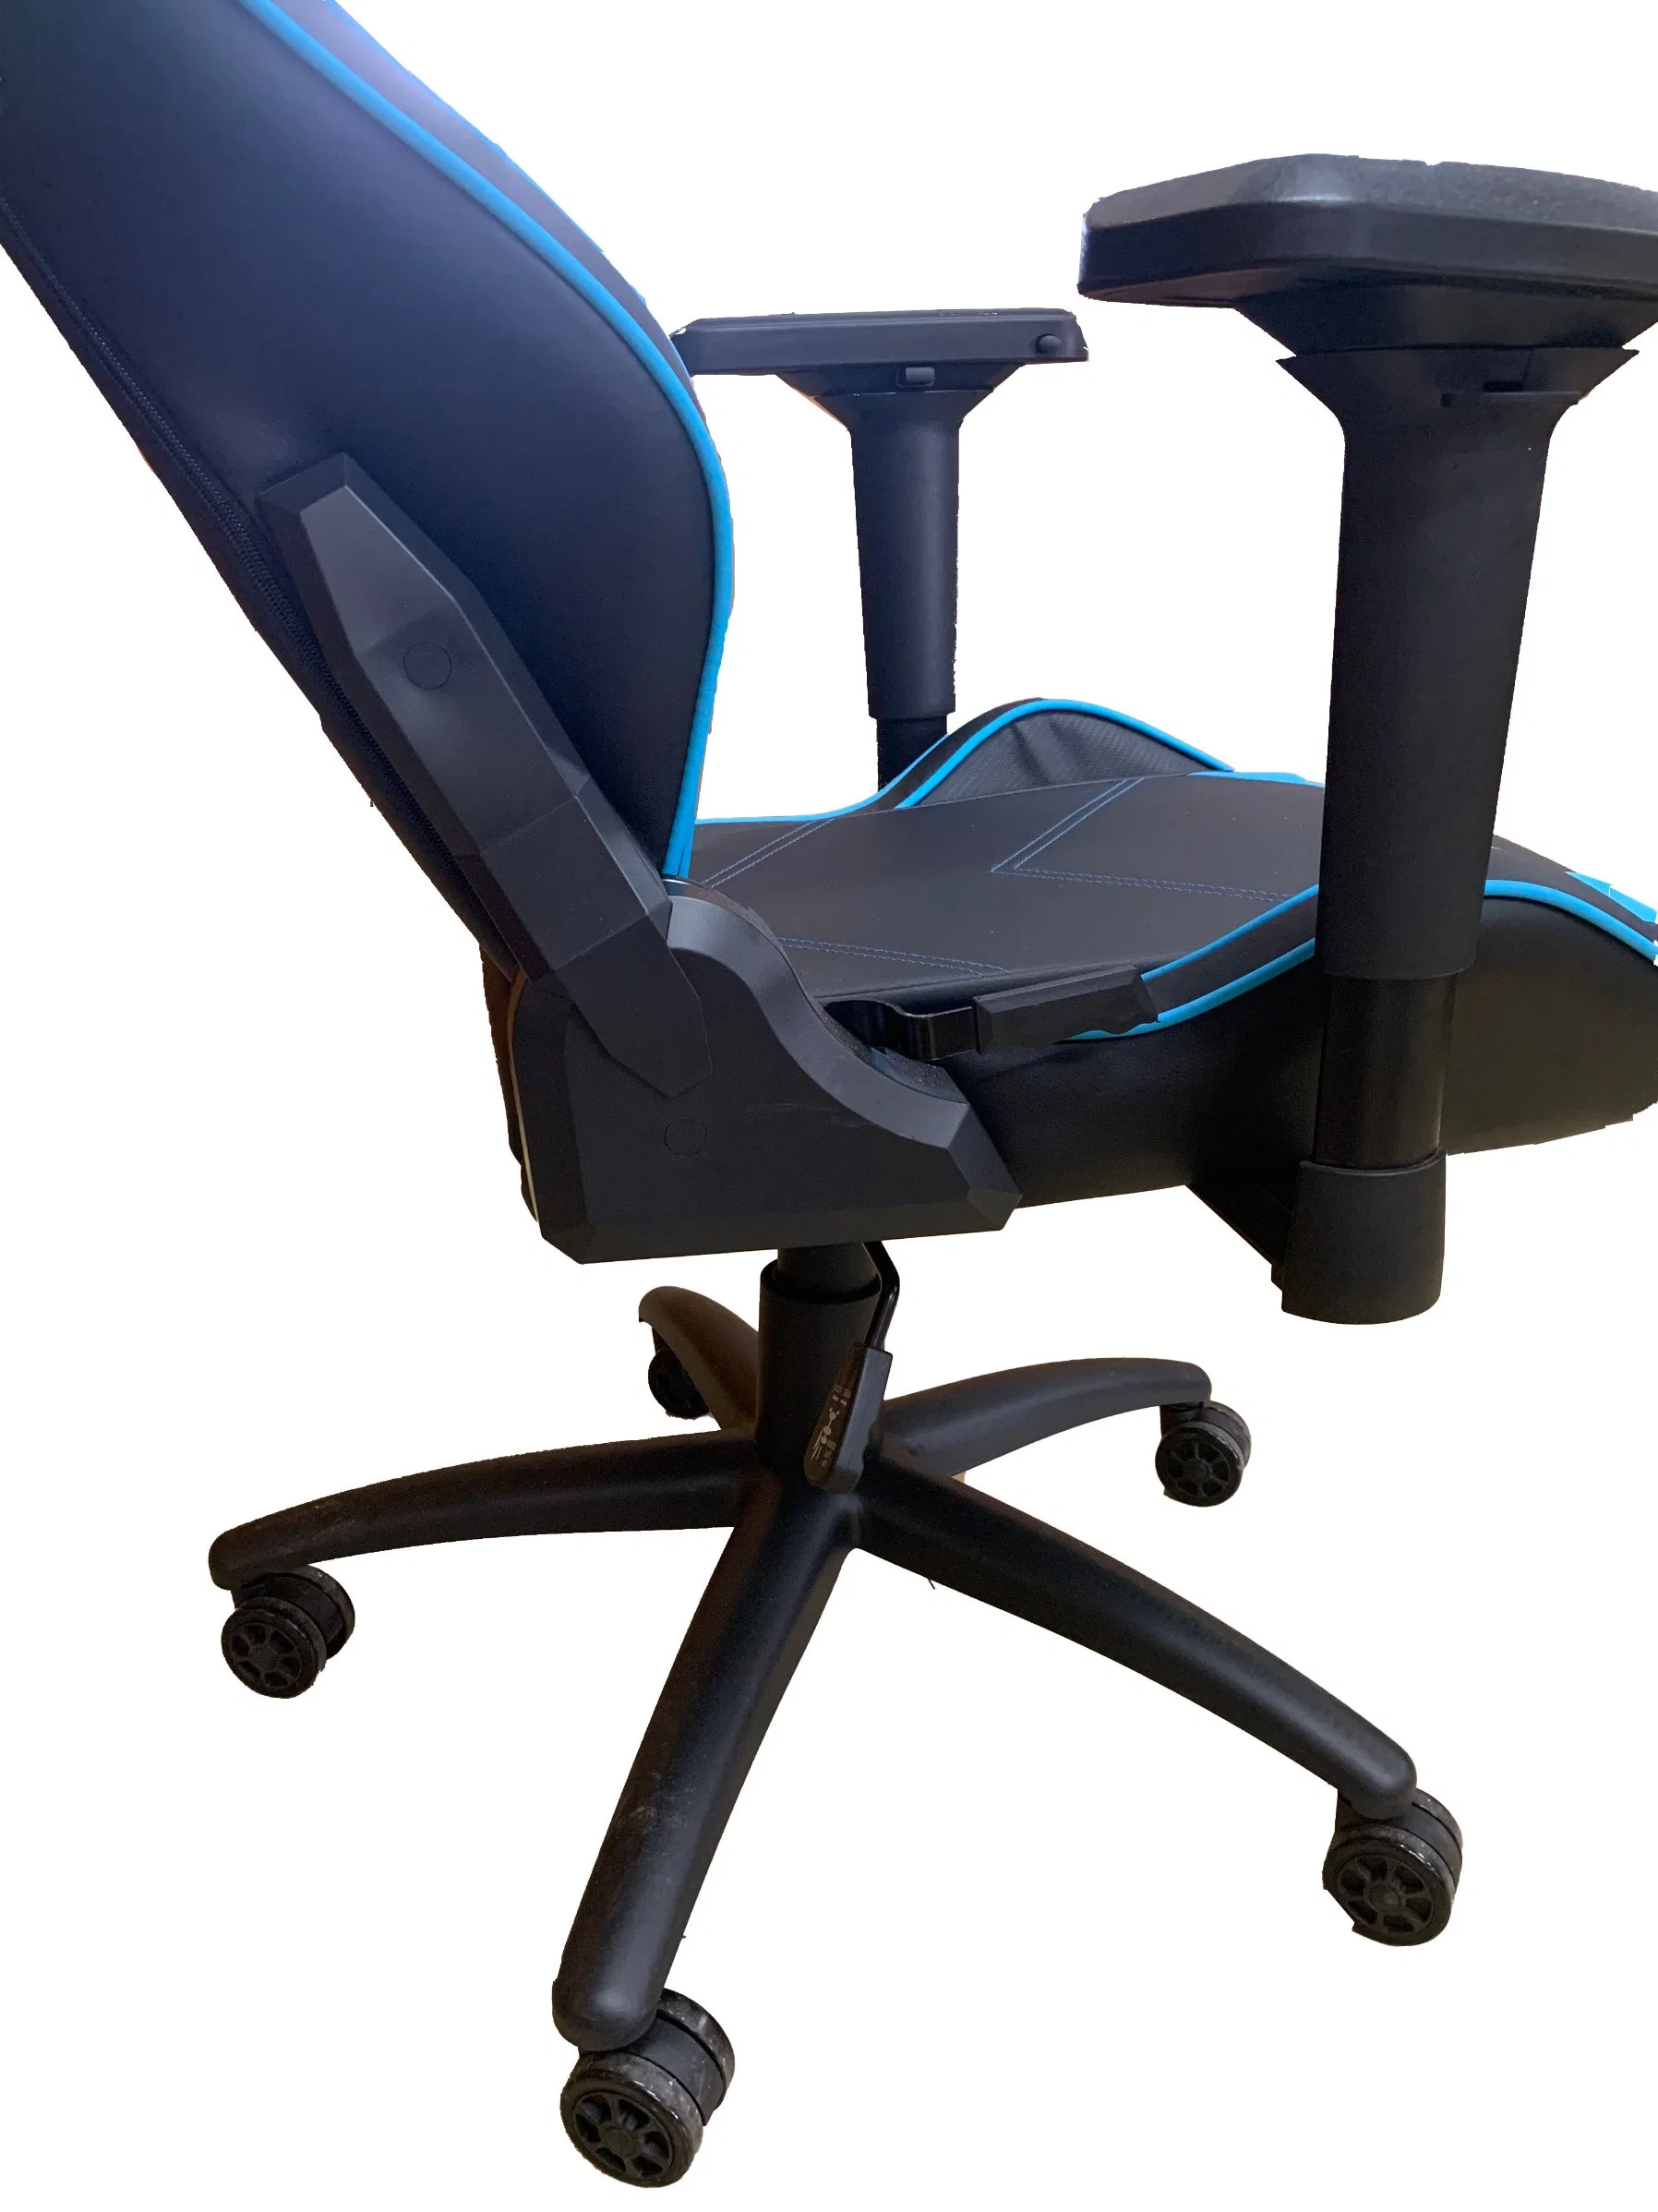 Original Factory Ergonomic Office Gaming Chair with Modern Style for Office, Hotel